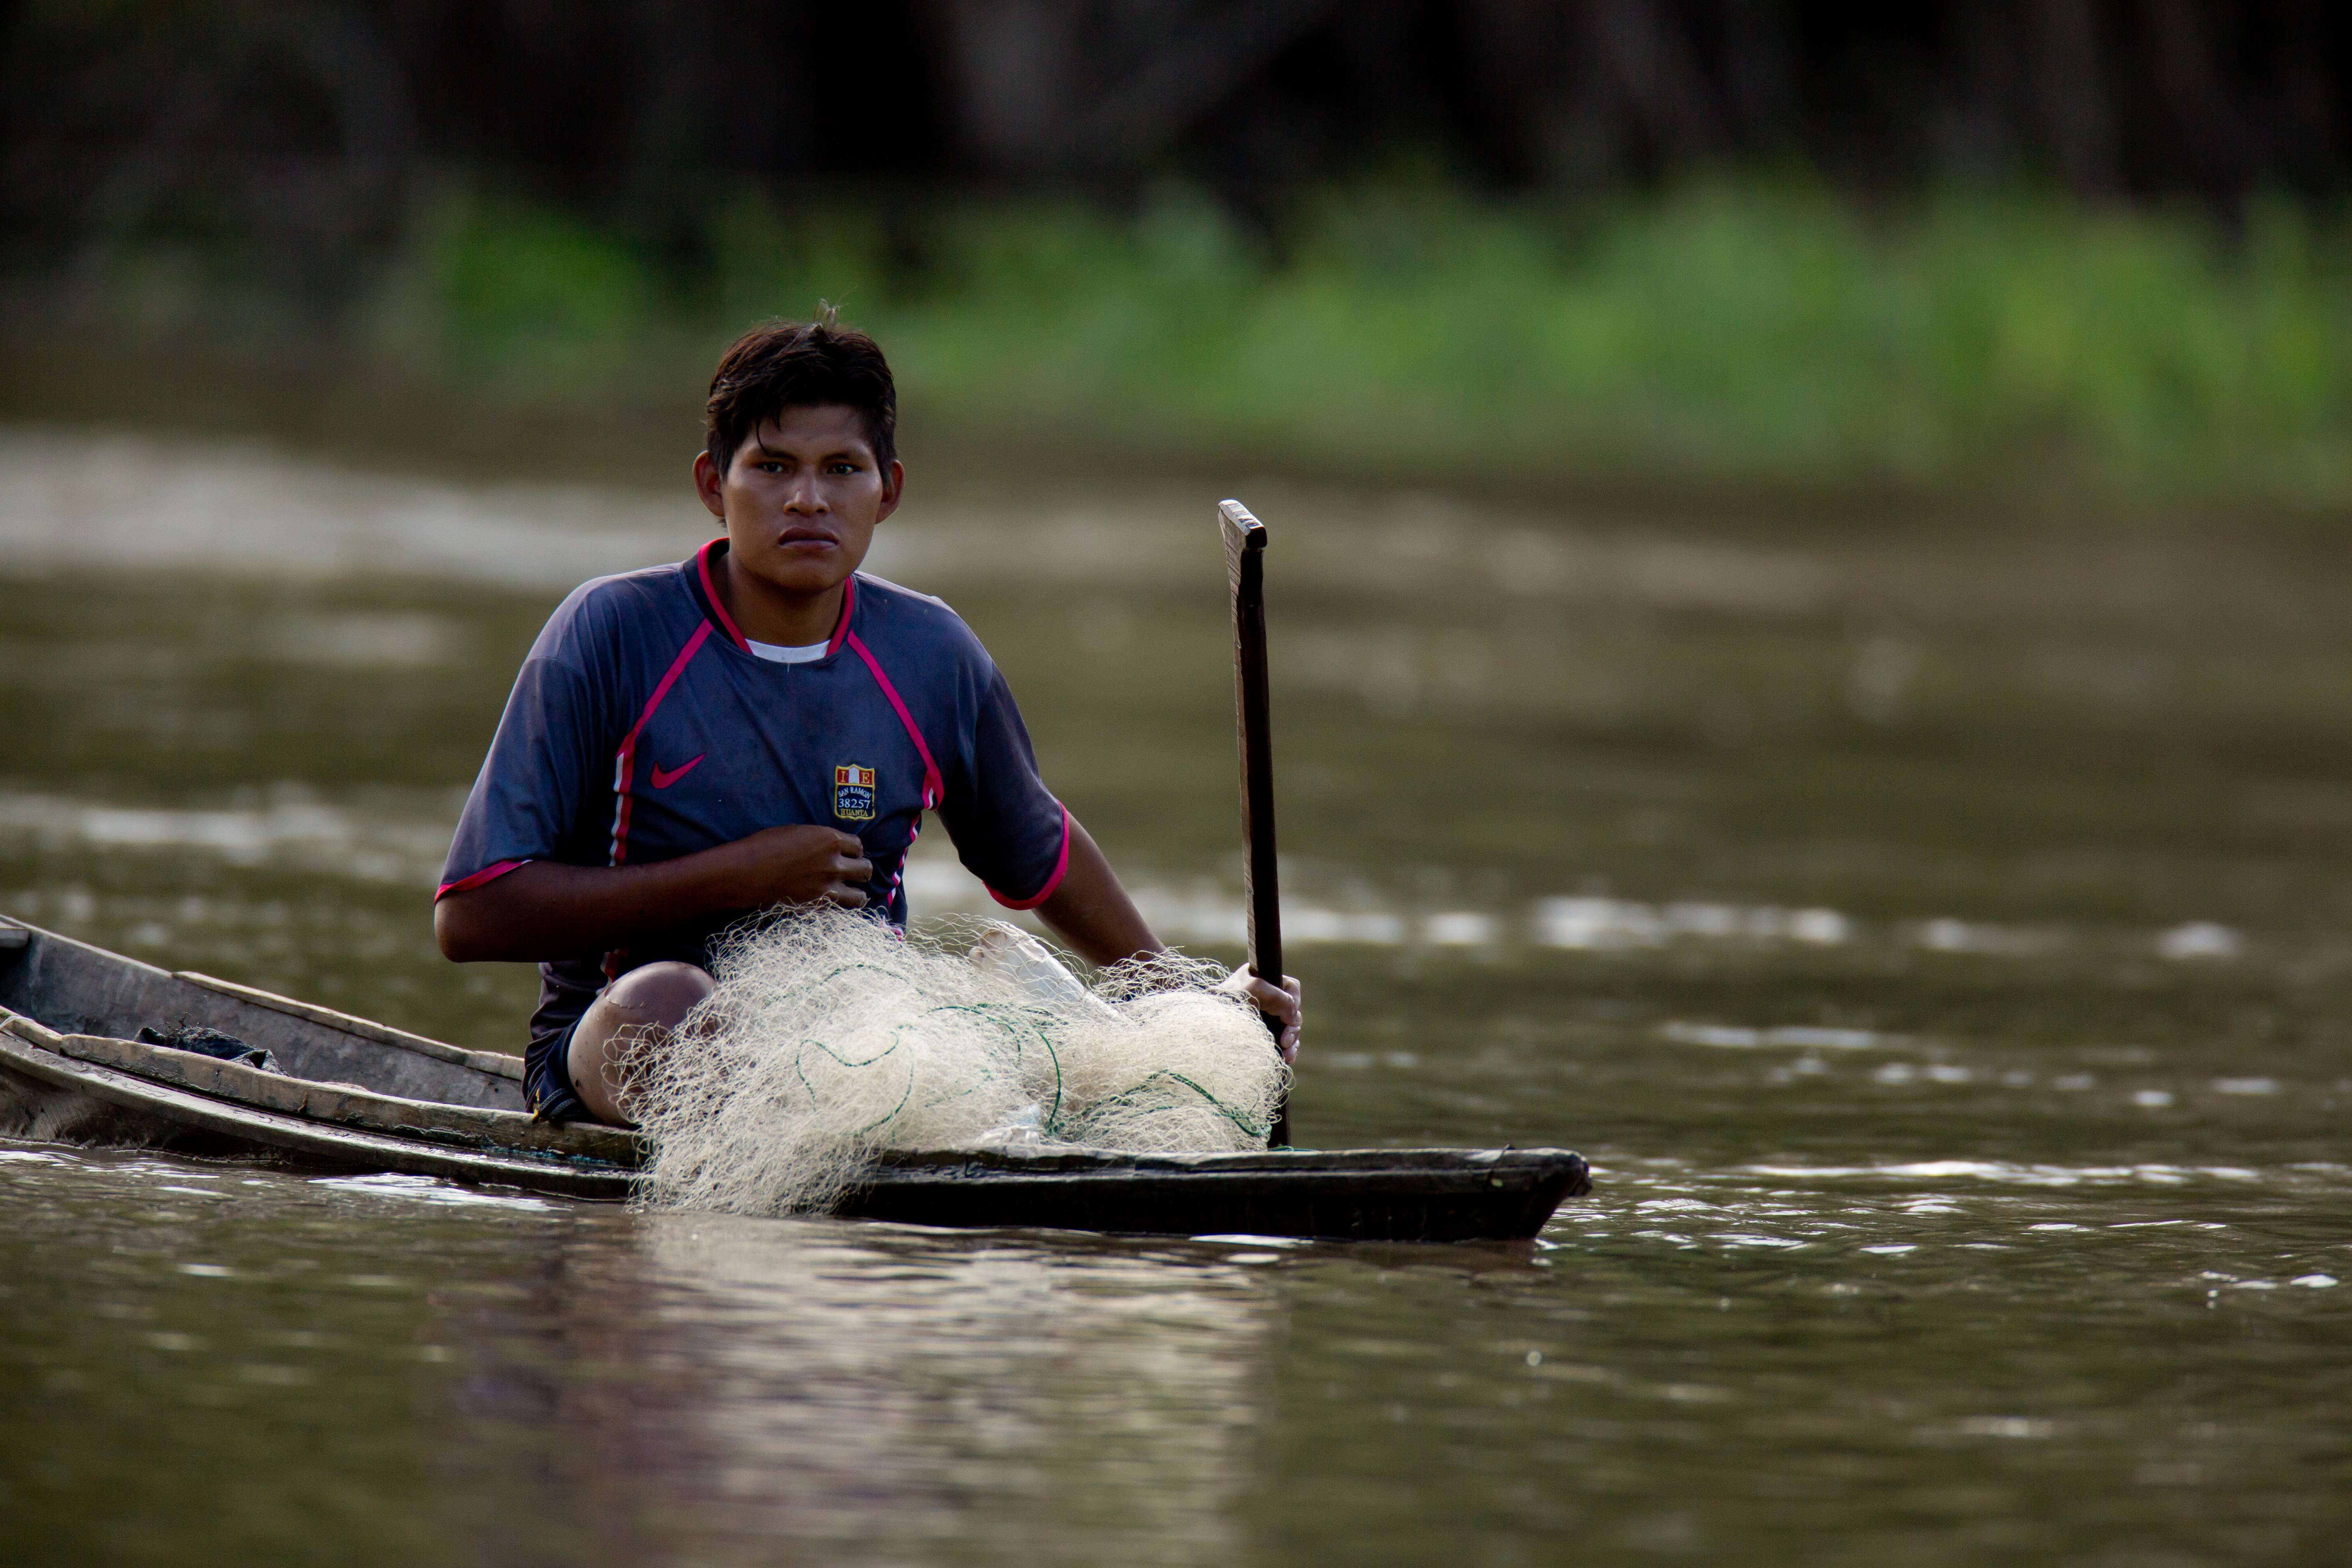 Local communities fish during the low season when it is easier to make a catch. The Reserve sets and enforces quotas to ensure sustainability of the freshwater ecosystem. © WWF-US/J.J. Huckin